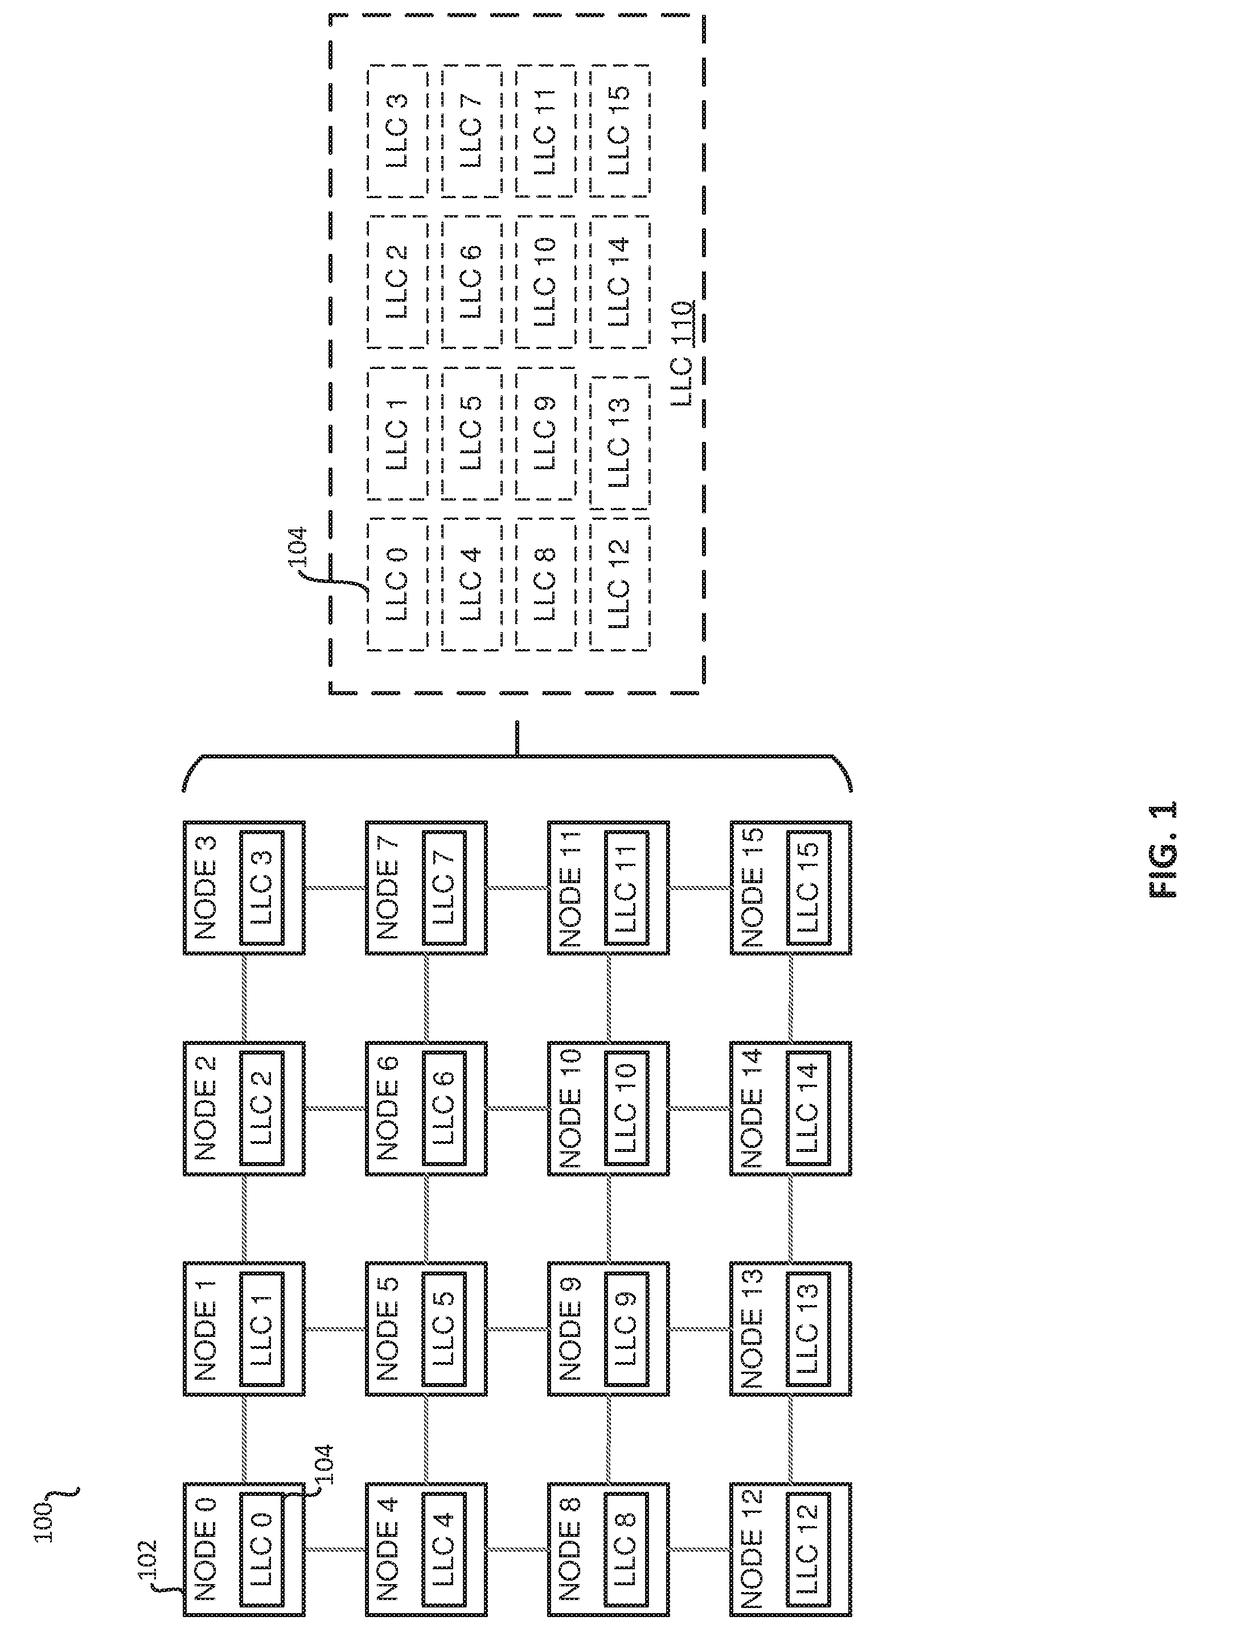 Method and system for leveraging non-uniform miss penality in cache replacement policy to improve processor performance and power